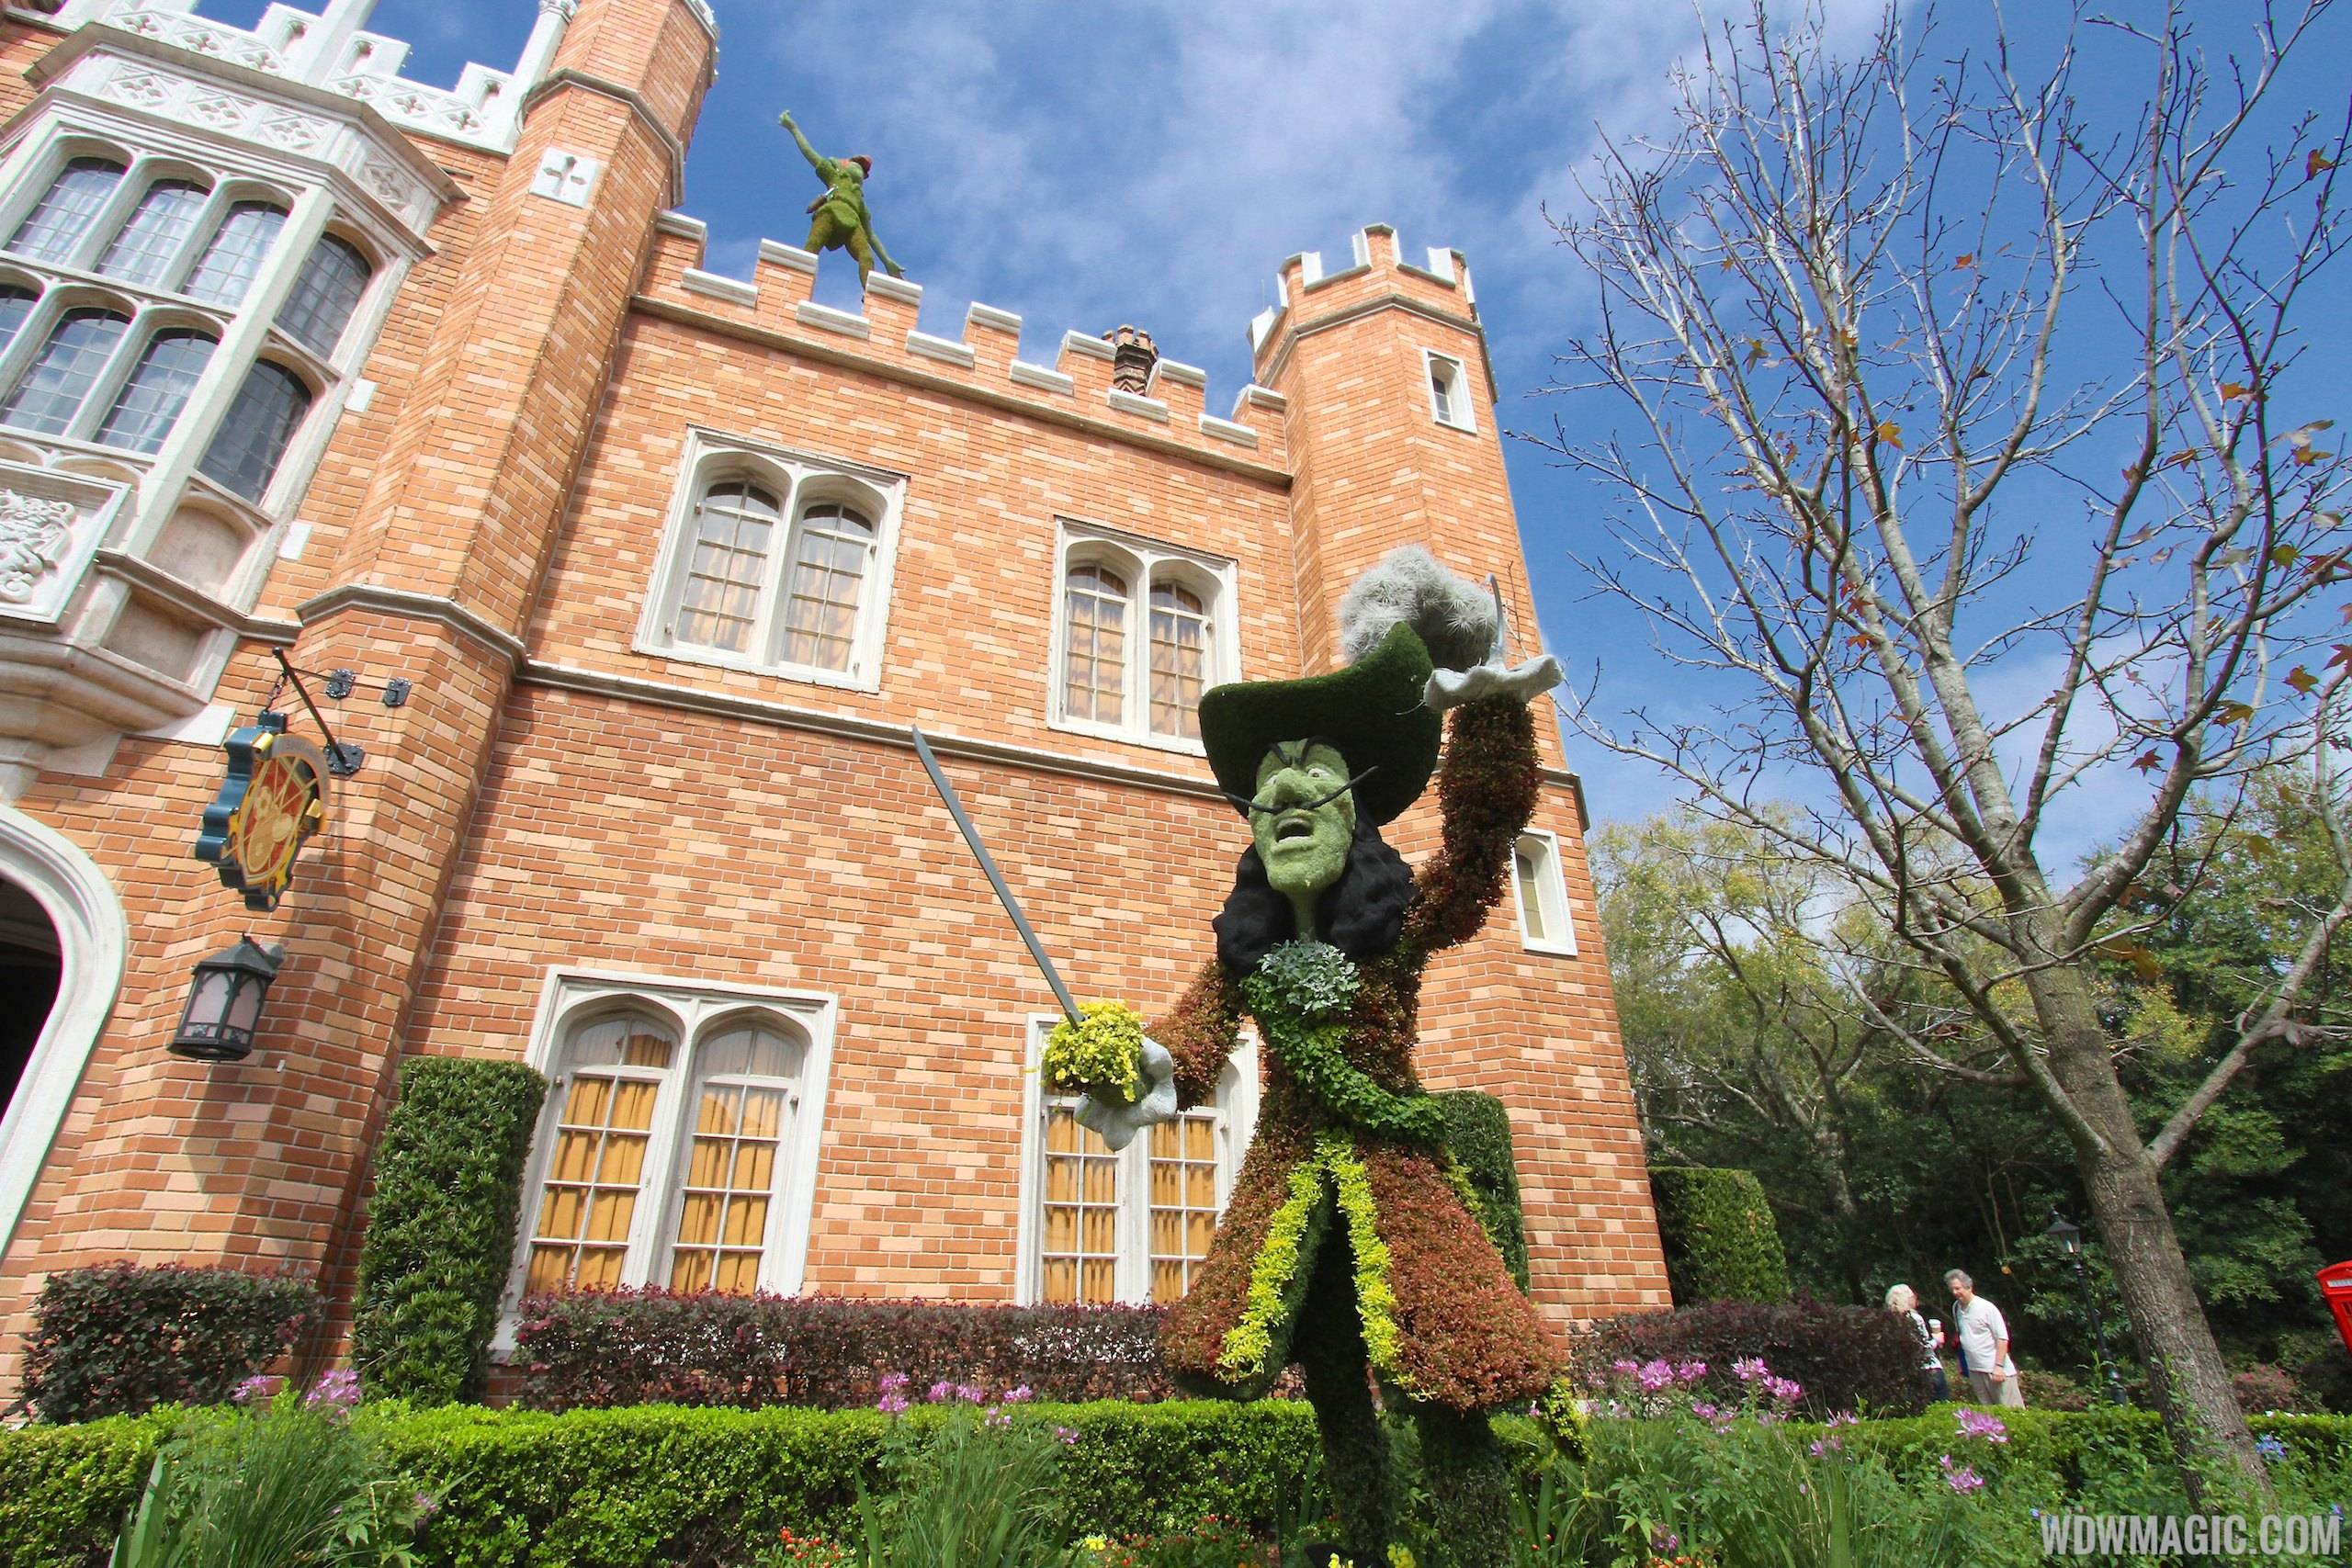 2014 Epcot Flower and Garden Festival - Peter Pan topiary at the UK Pavilion